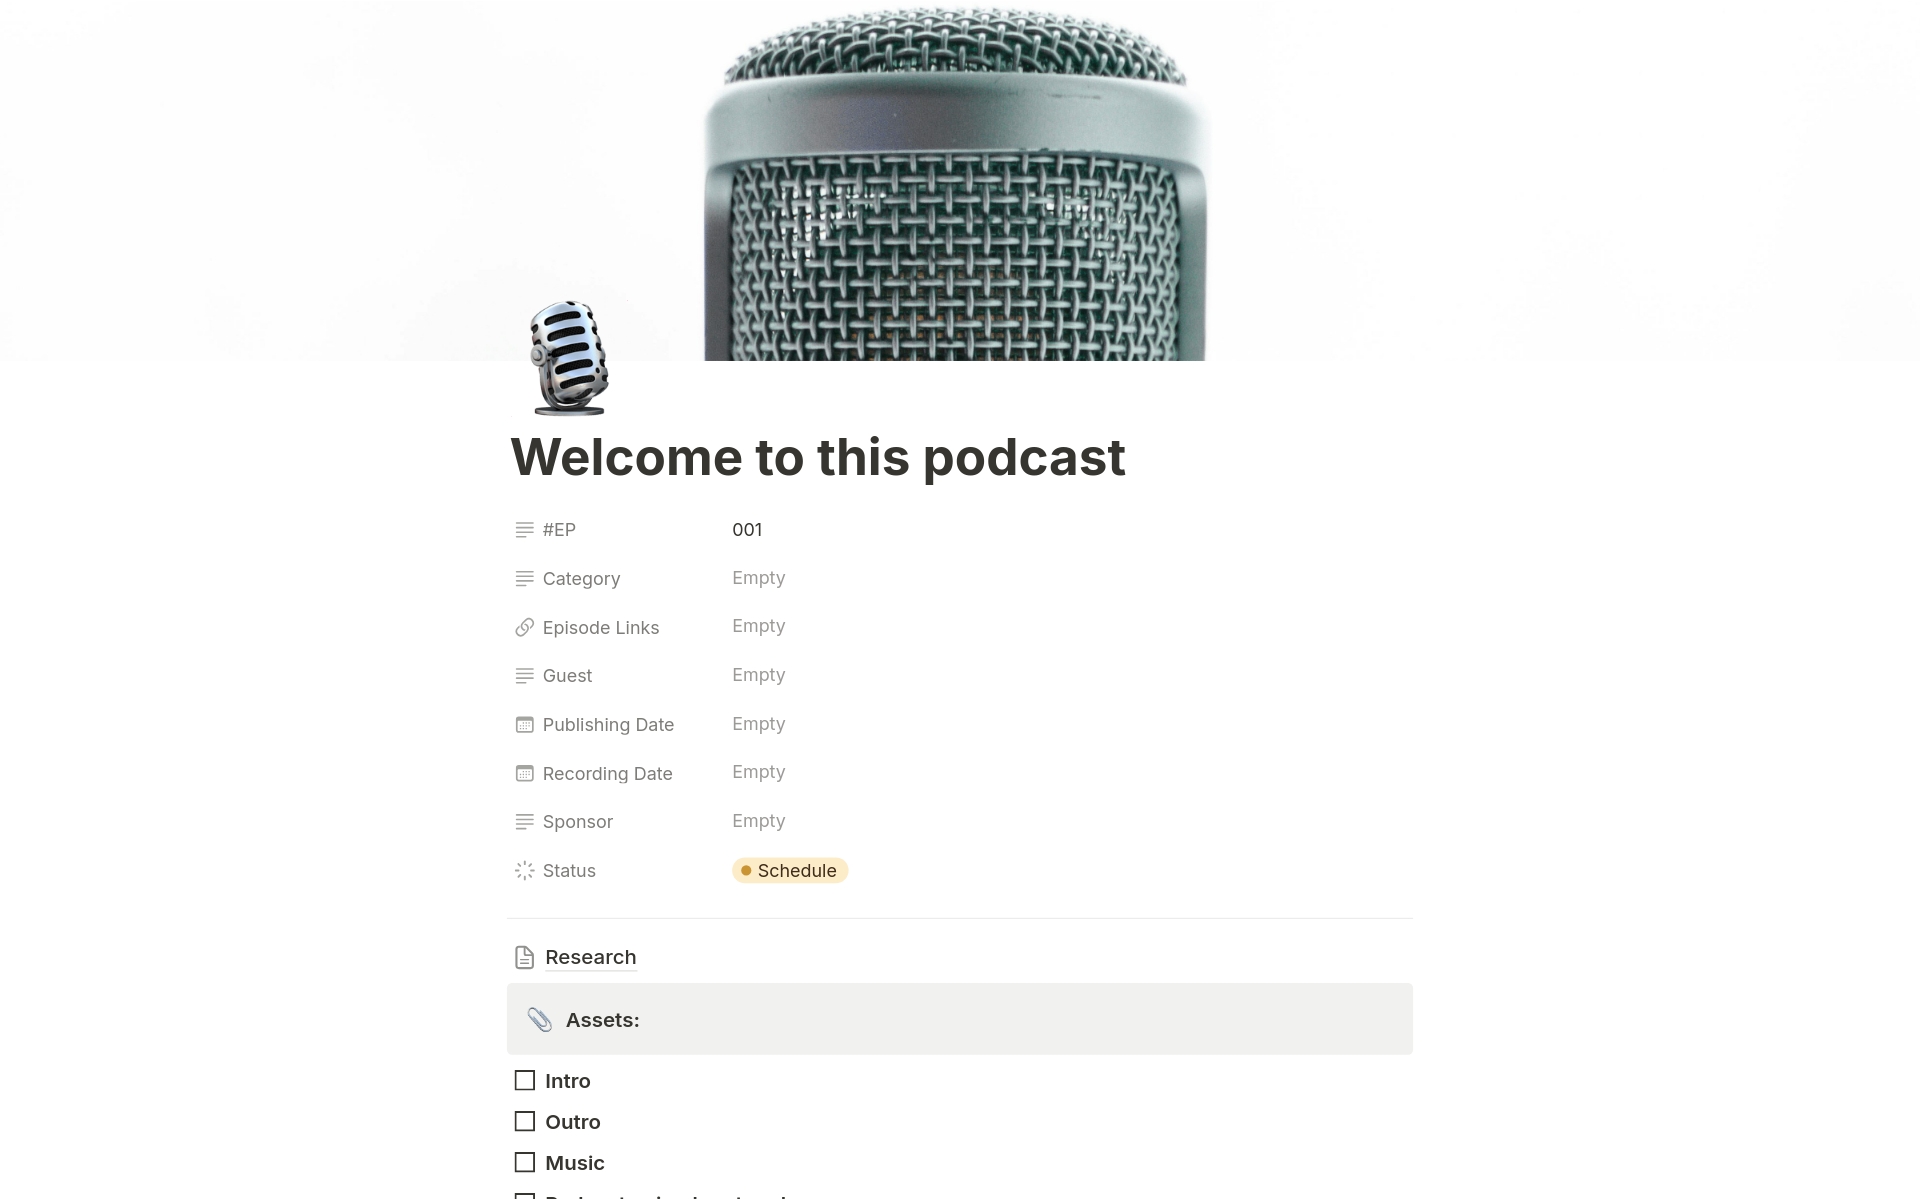 If you are a podcaster looking to save time and energy, you can now optimize the planning and tracking of your episodes with this template. Ensure seamless execution and consistent quality across all your podcast episodes.